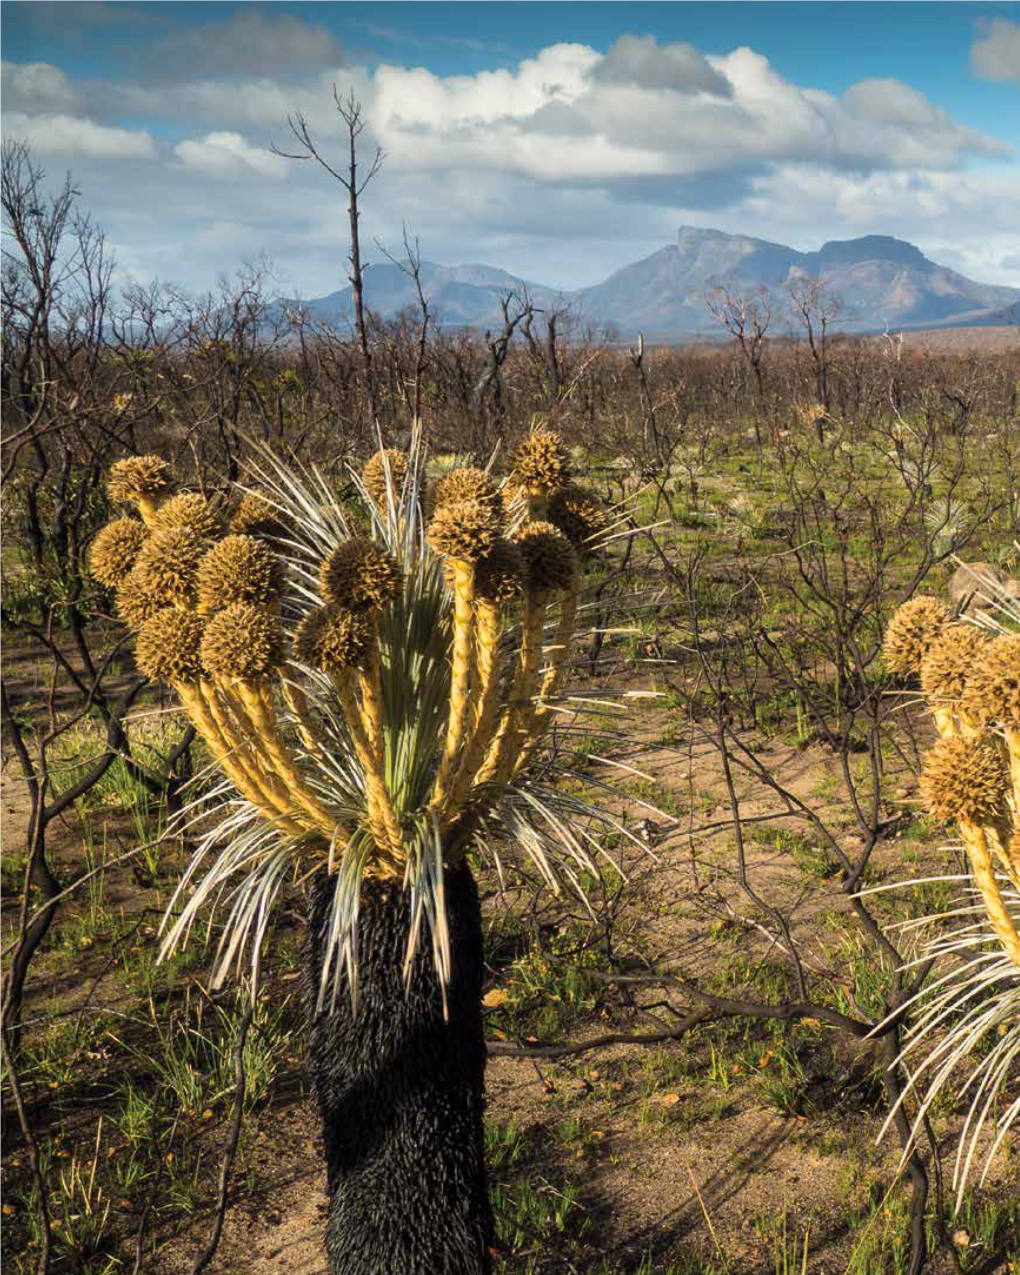 Recovering from Bushfire in a Biodiversity Hotspot